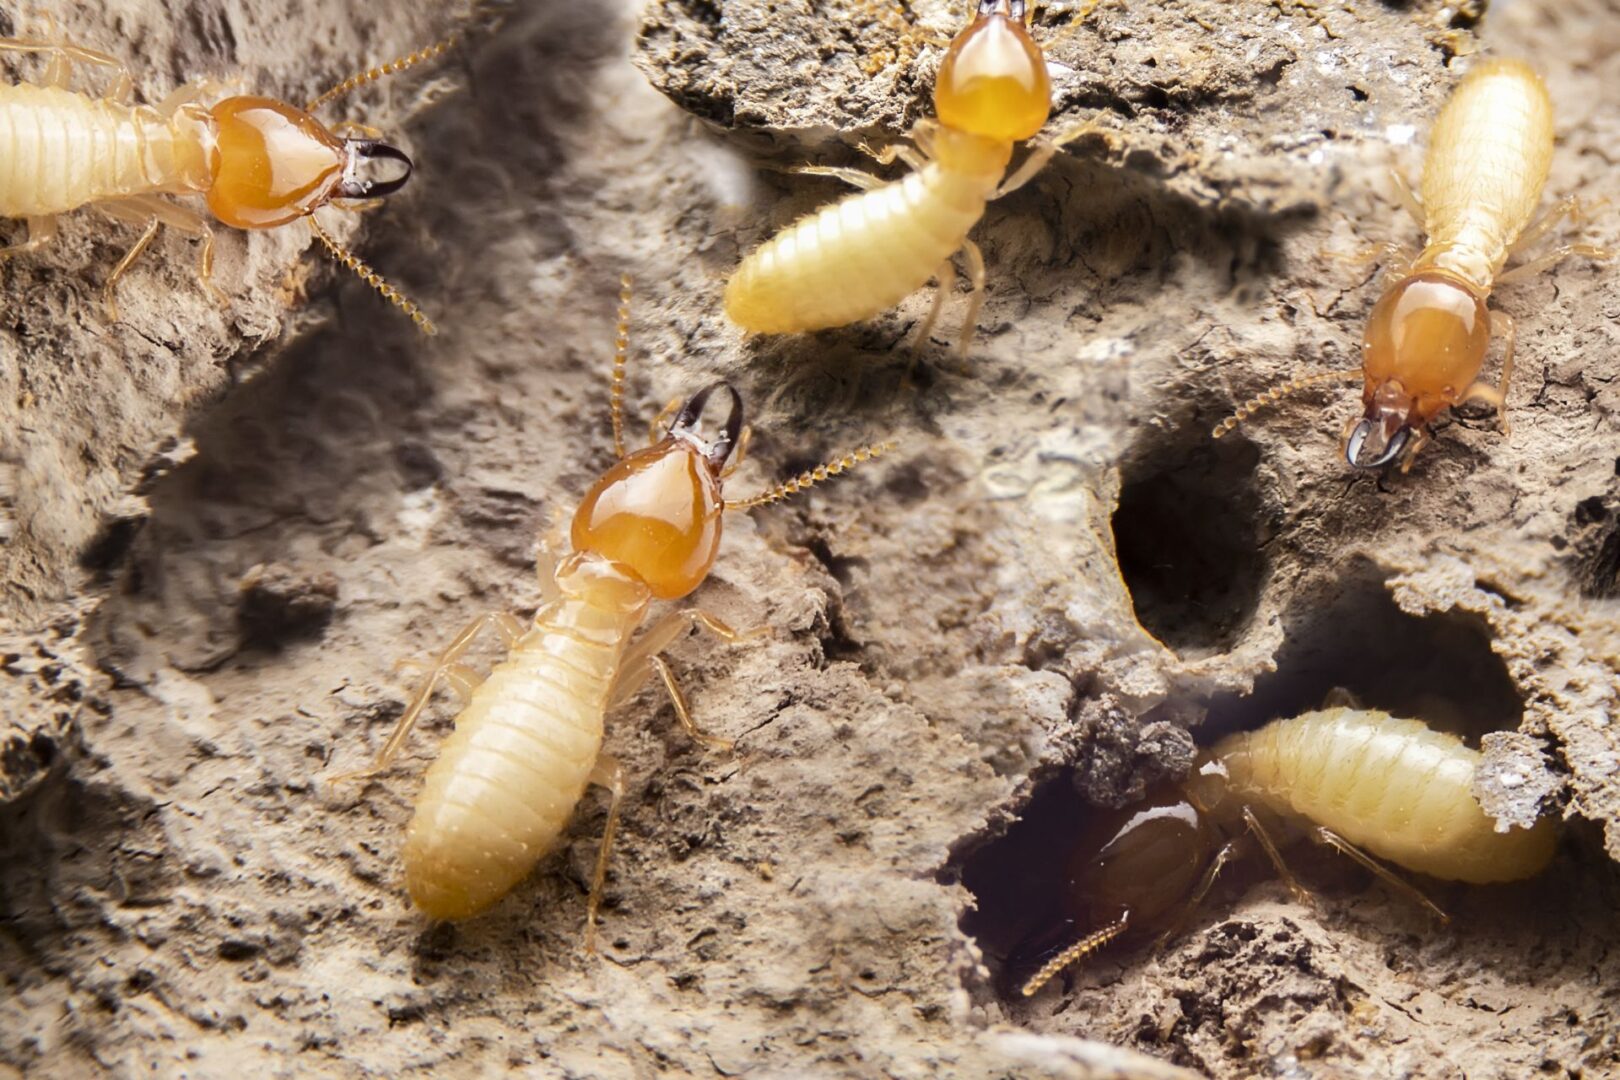 the small termite on decaying timber. The termite on the ground is searching for food to feed the larvae in the cavity.